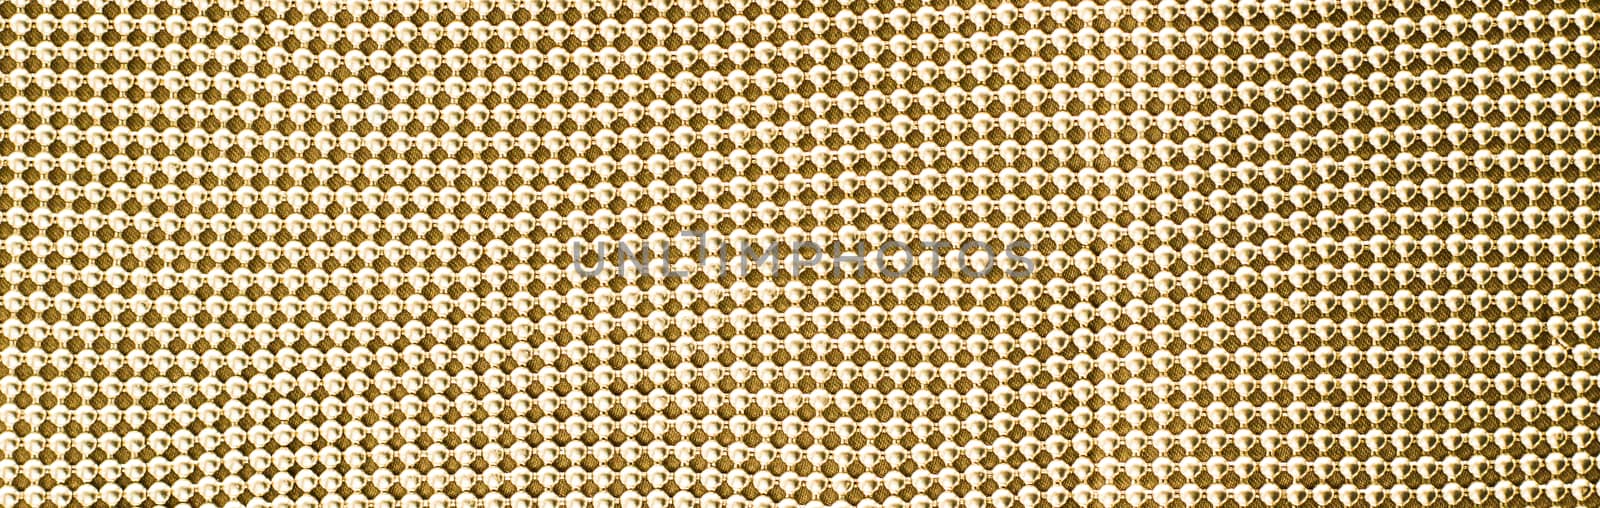 Golden metallic abstract background, futuristic surface and high tech materials